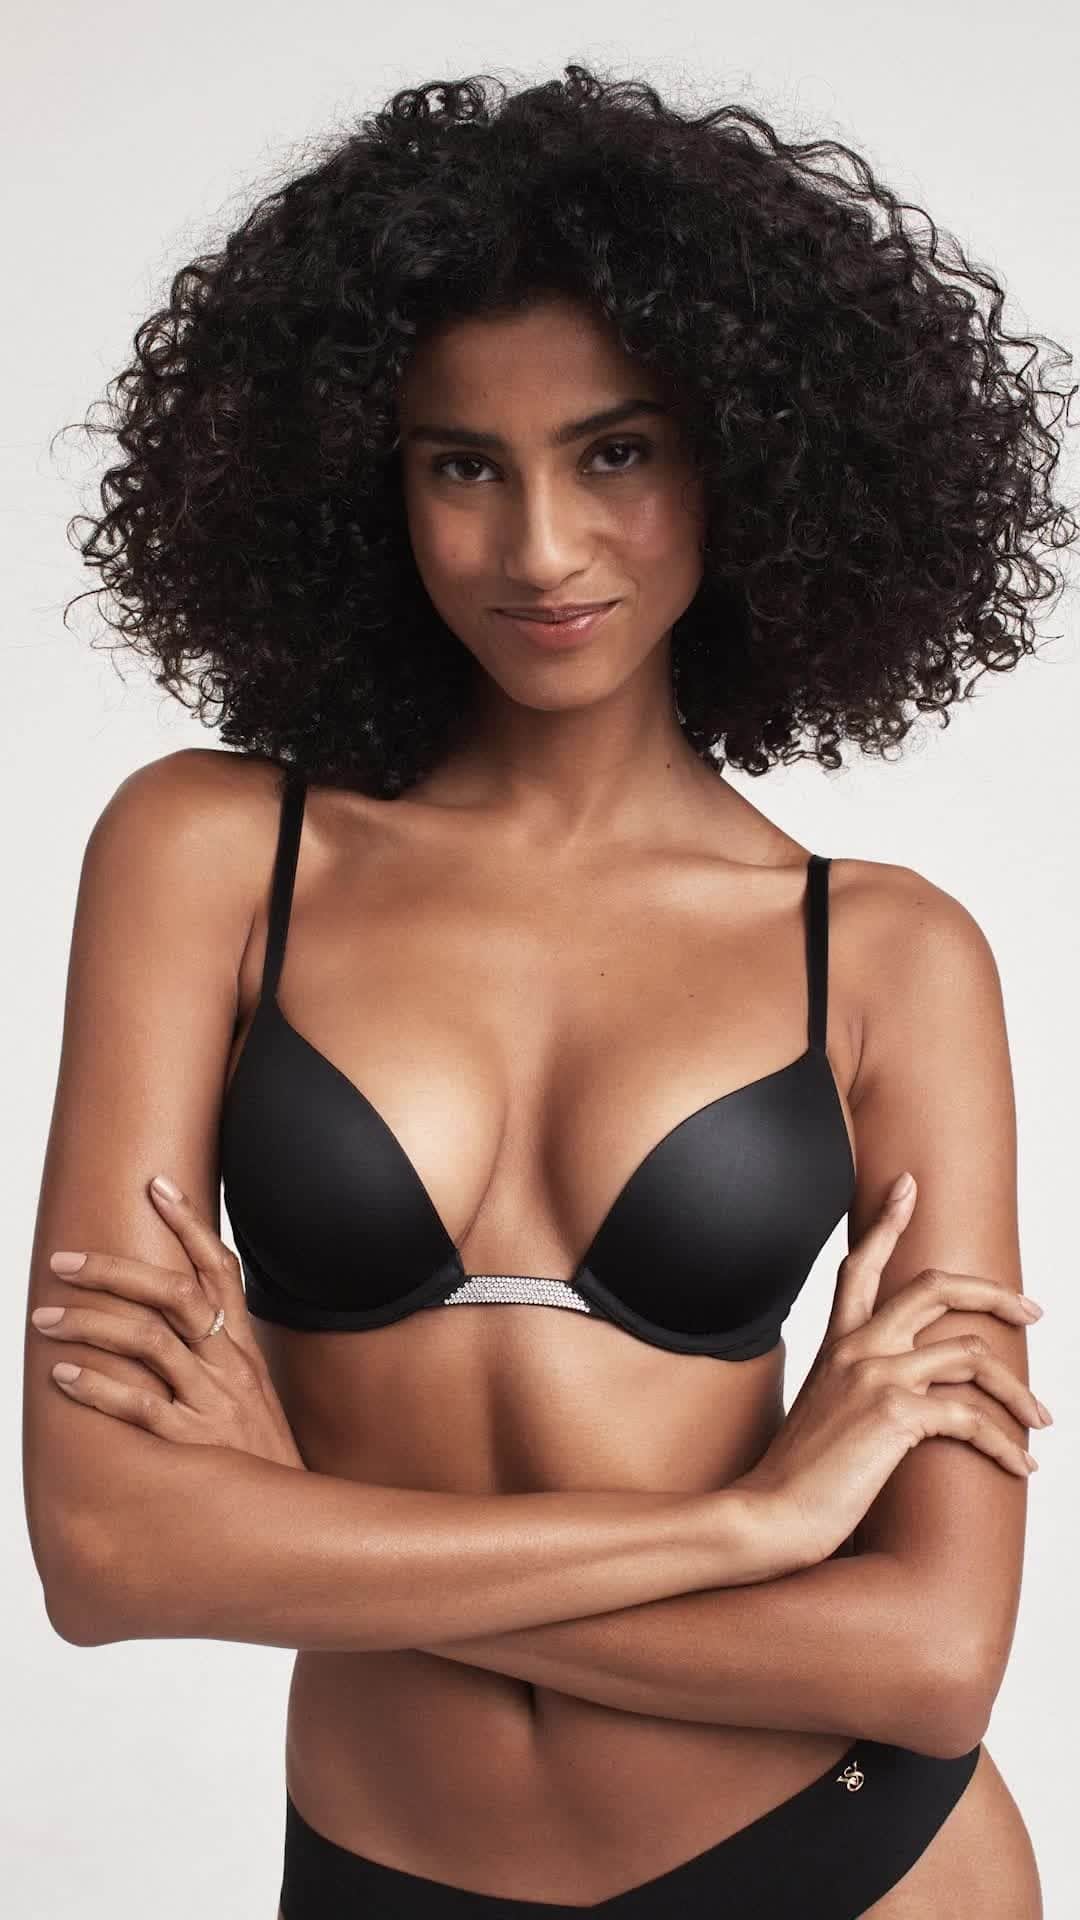 Your request for a Bra that you can confidently wear while